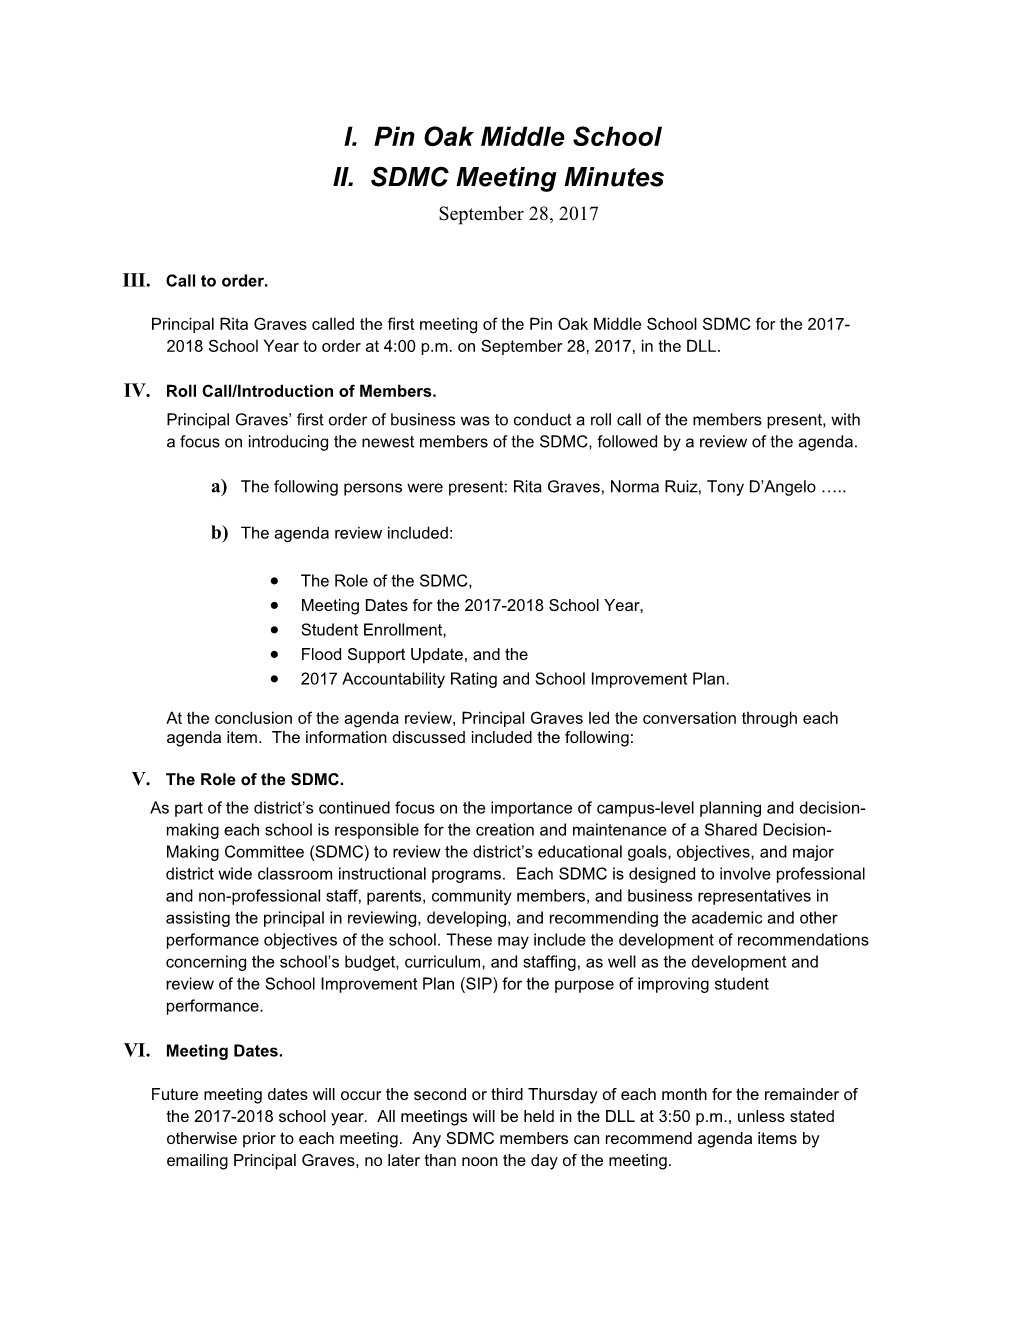 Formal Meeting Minutes s11